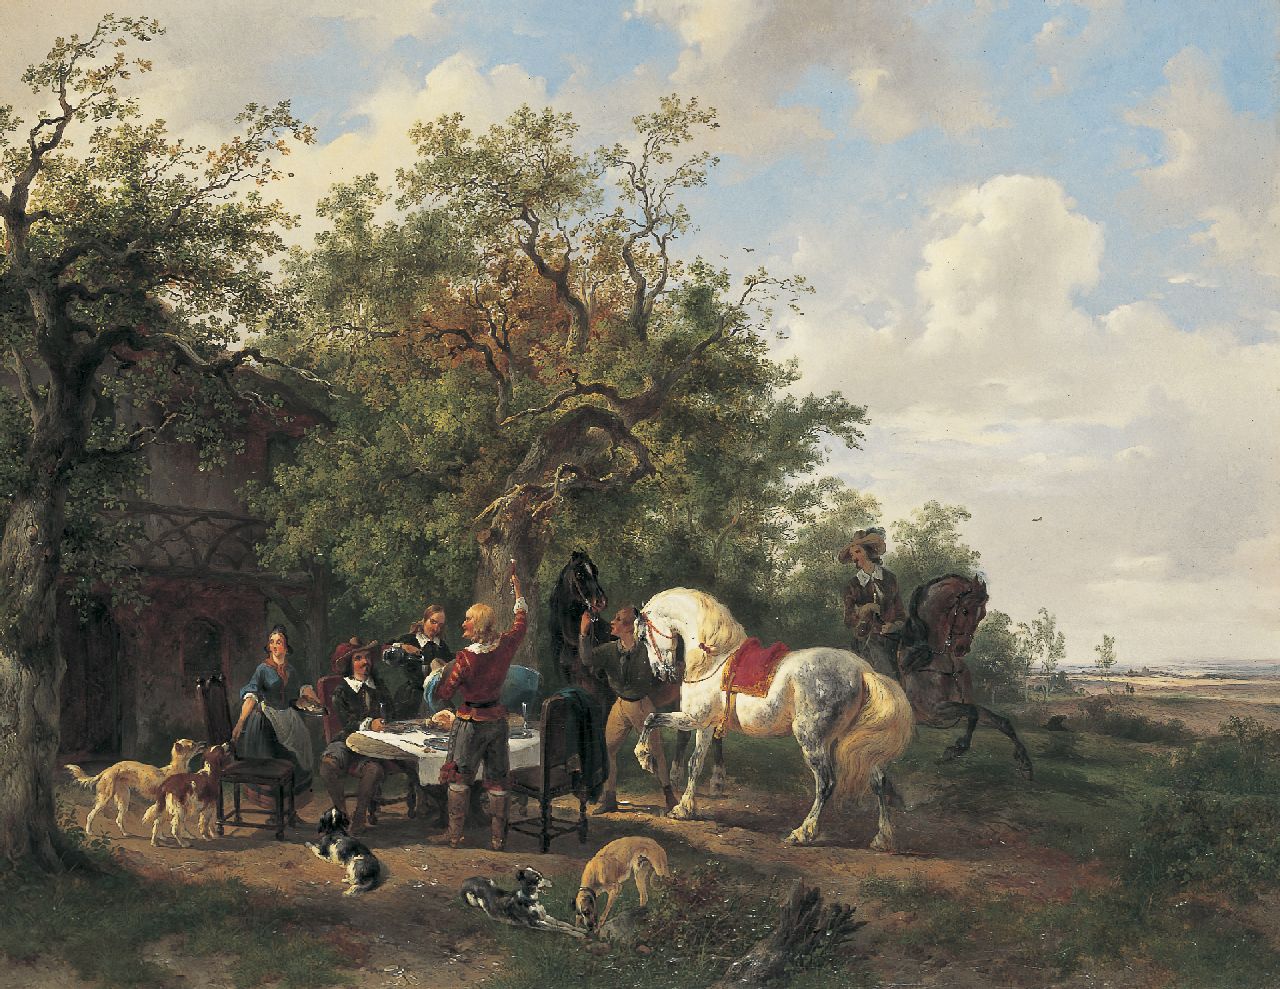 Verschuur W.  | Wouterus Verschuur, An elegant company in a landscape, oil on canvas 57.5 x 73.5 cm, signed l.r. and painted between 1838-1840